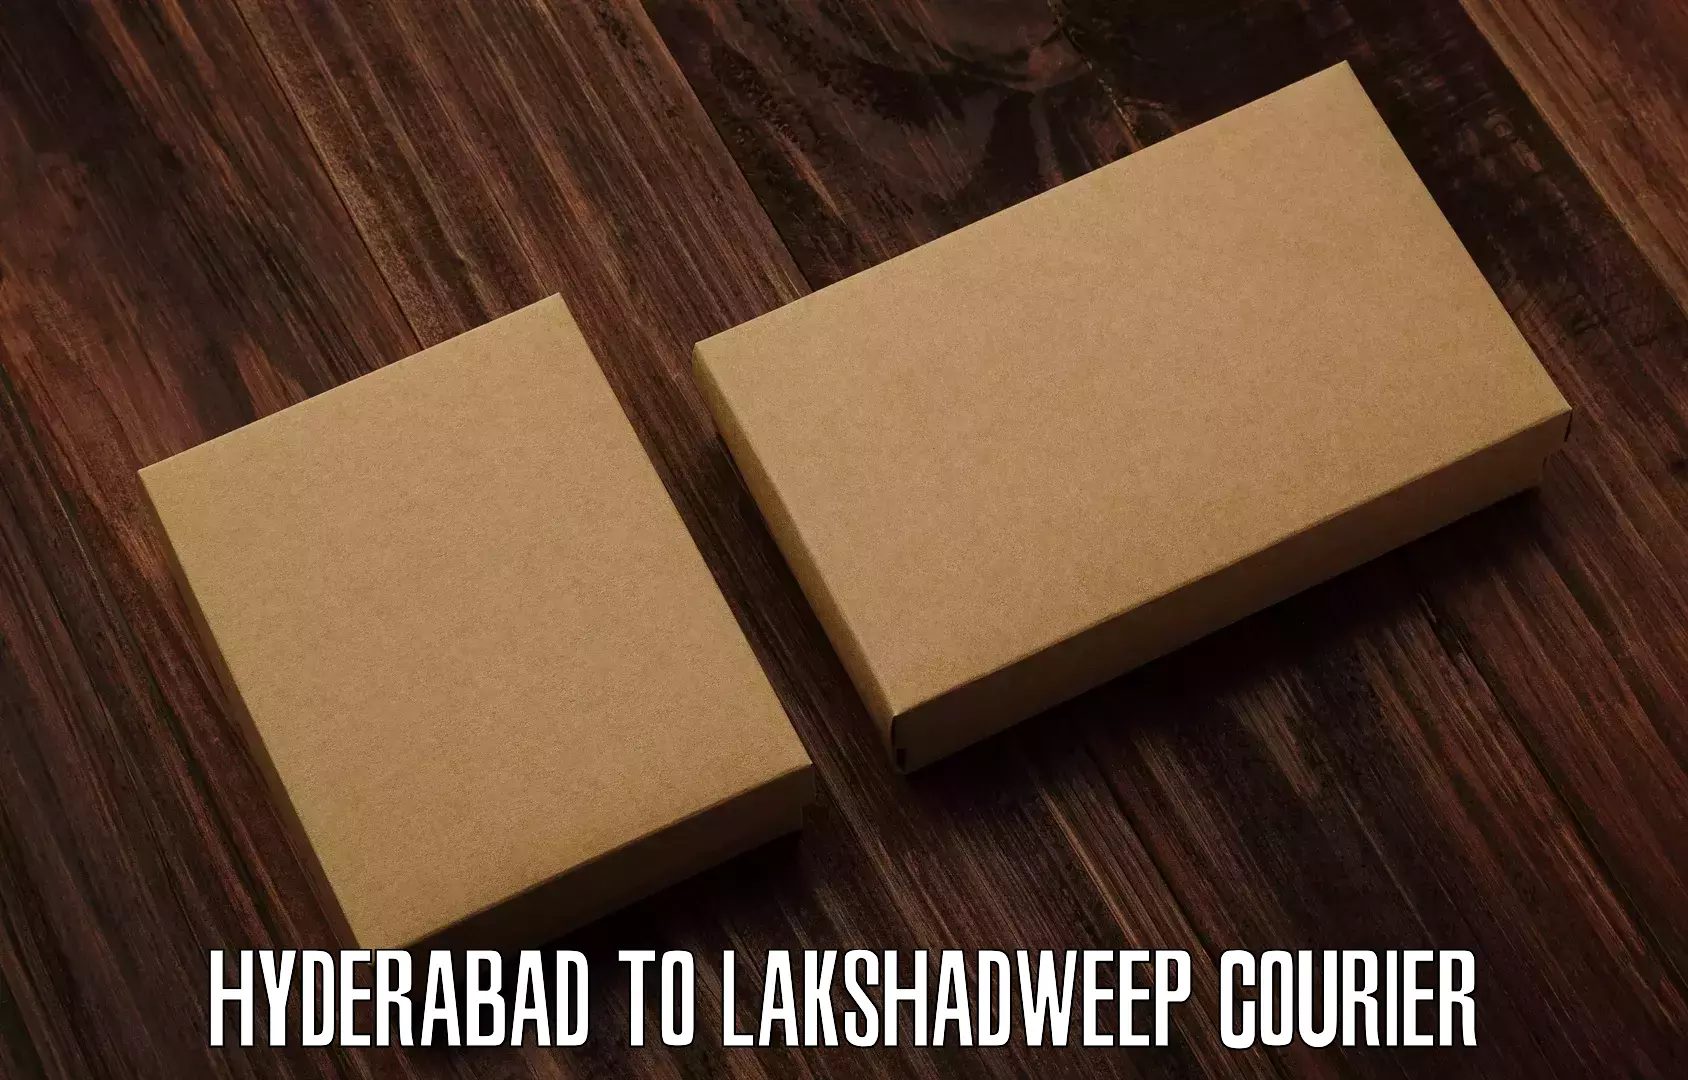 Package delivery network Hyderabad to Lakshadweep